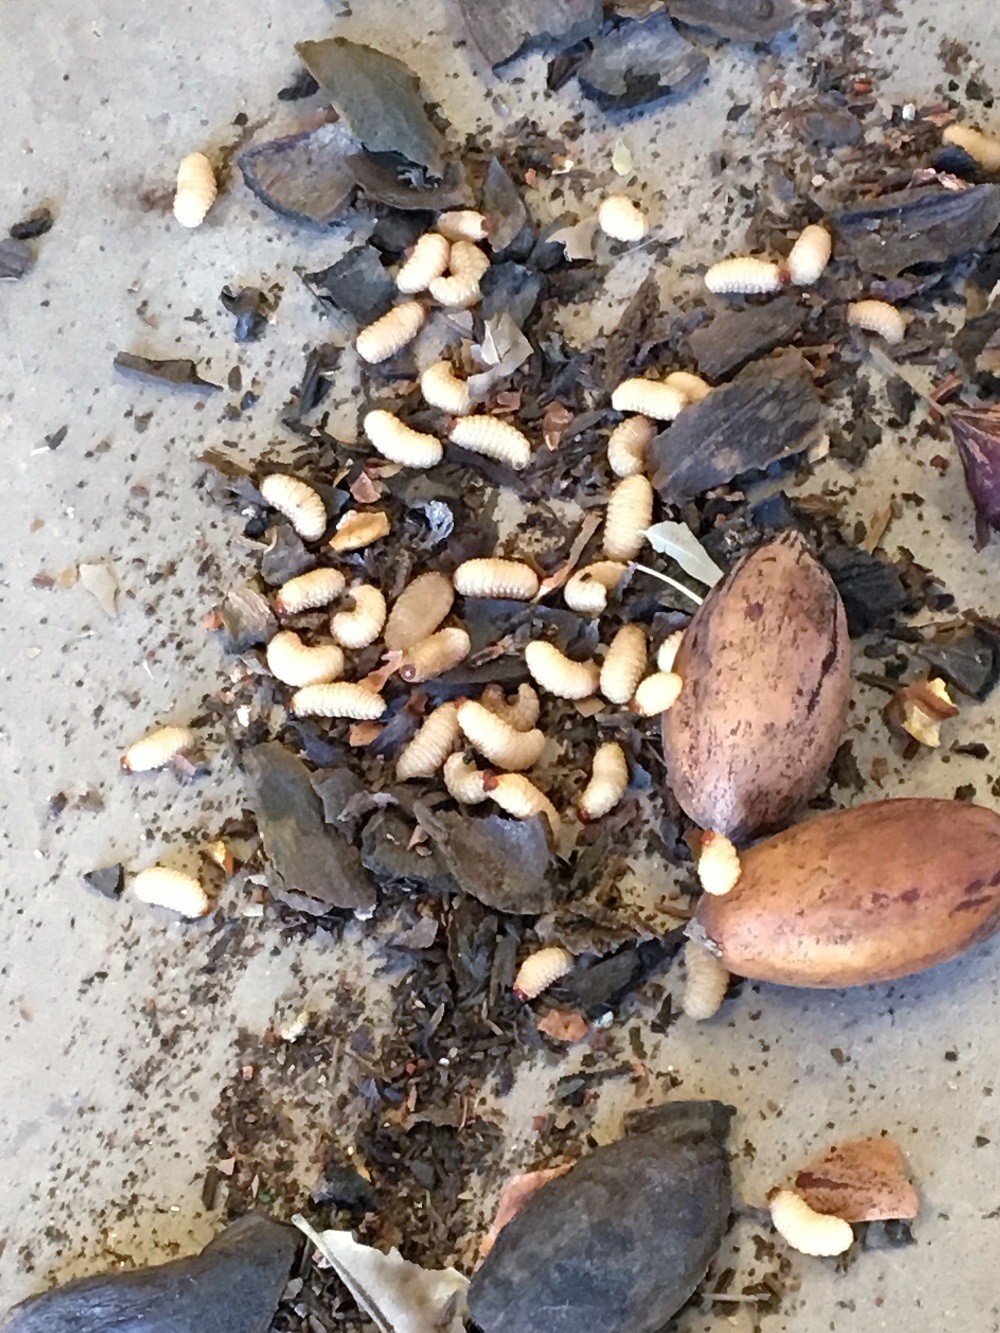 Pecans mixed with several larvae around the shells.  